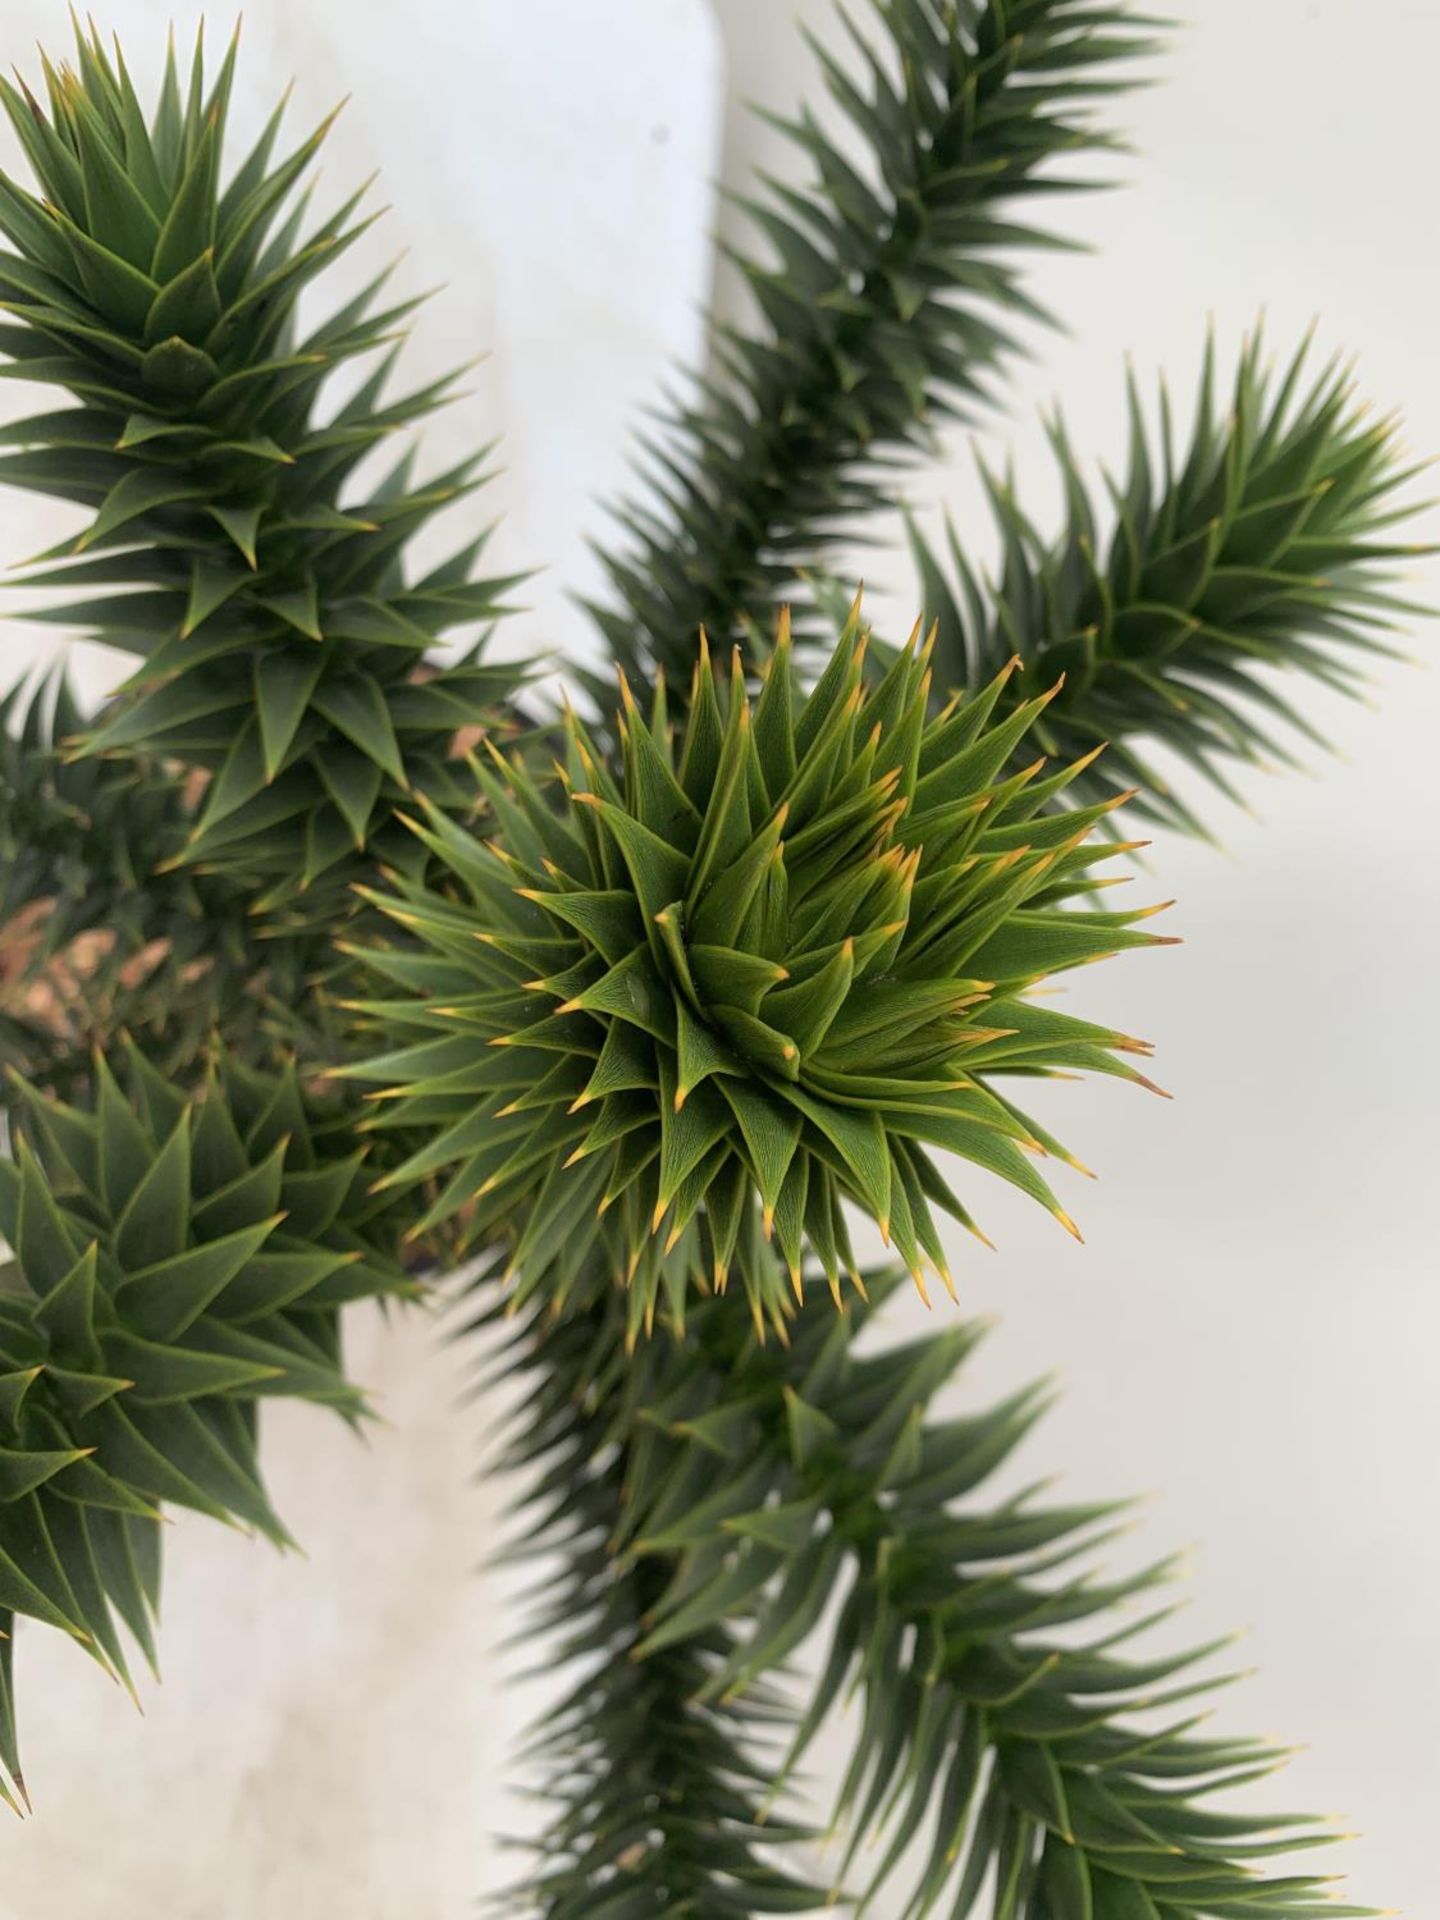 ONE MONKEY PUZZLE TREE ARAUCARIA ARAUCANA APPROX 70CM IN HEIGHT IN A 5 LTR POT PLUS VAT - Image 5 of 5